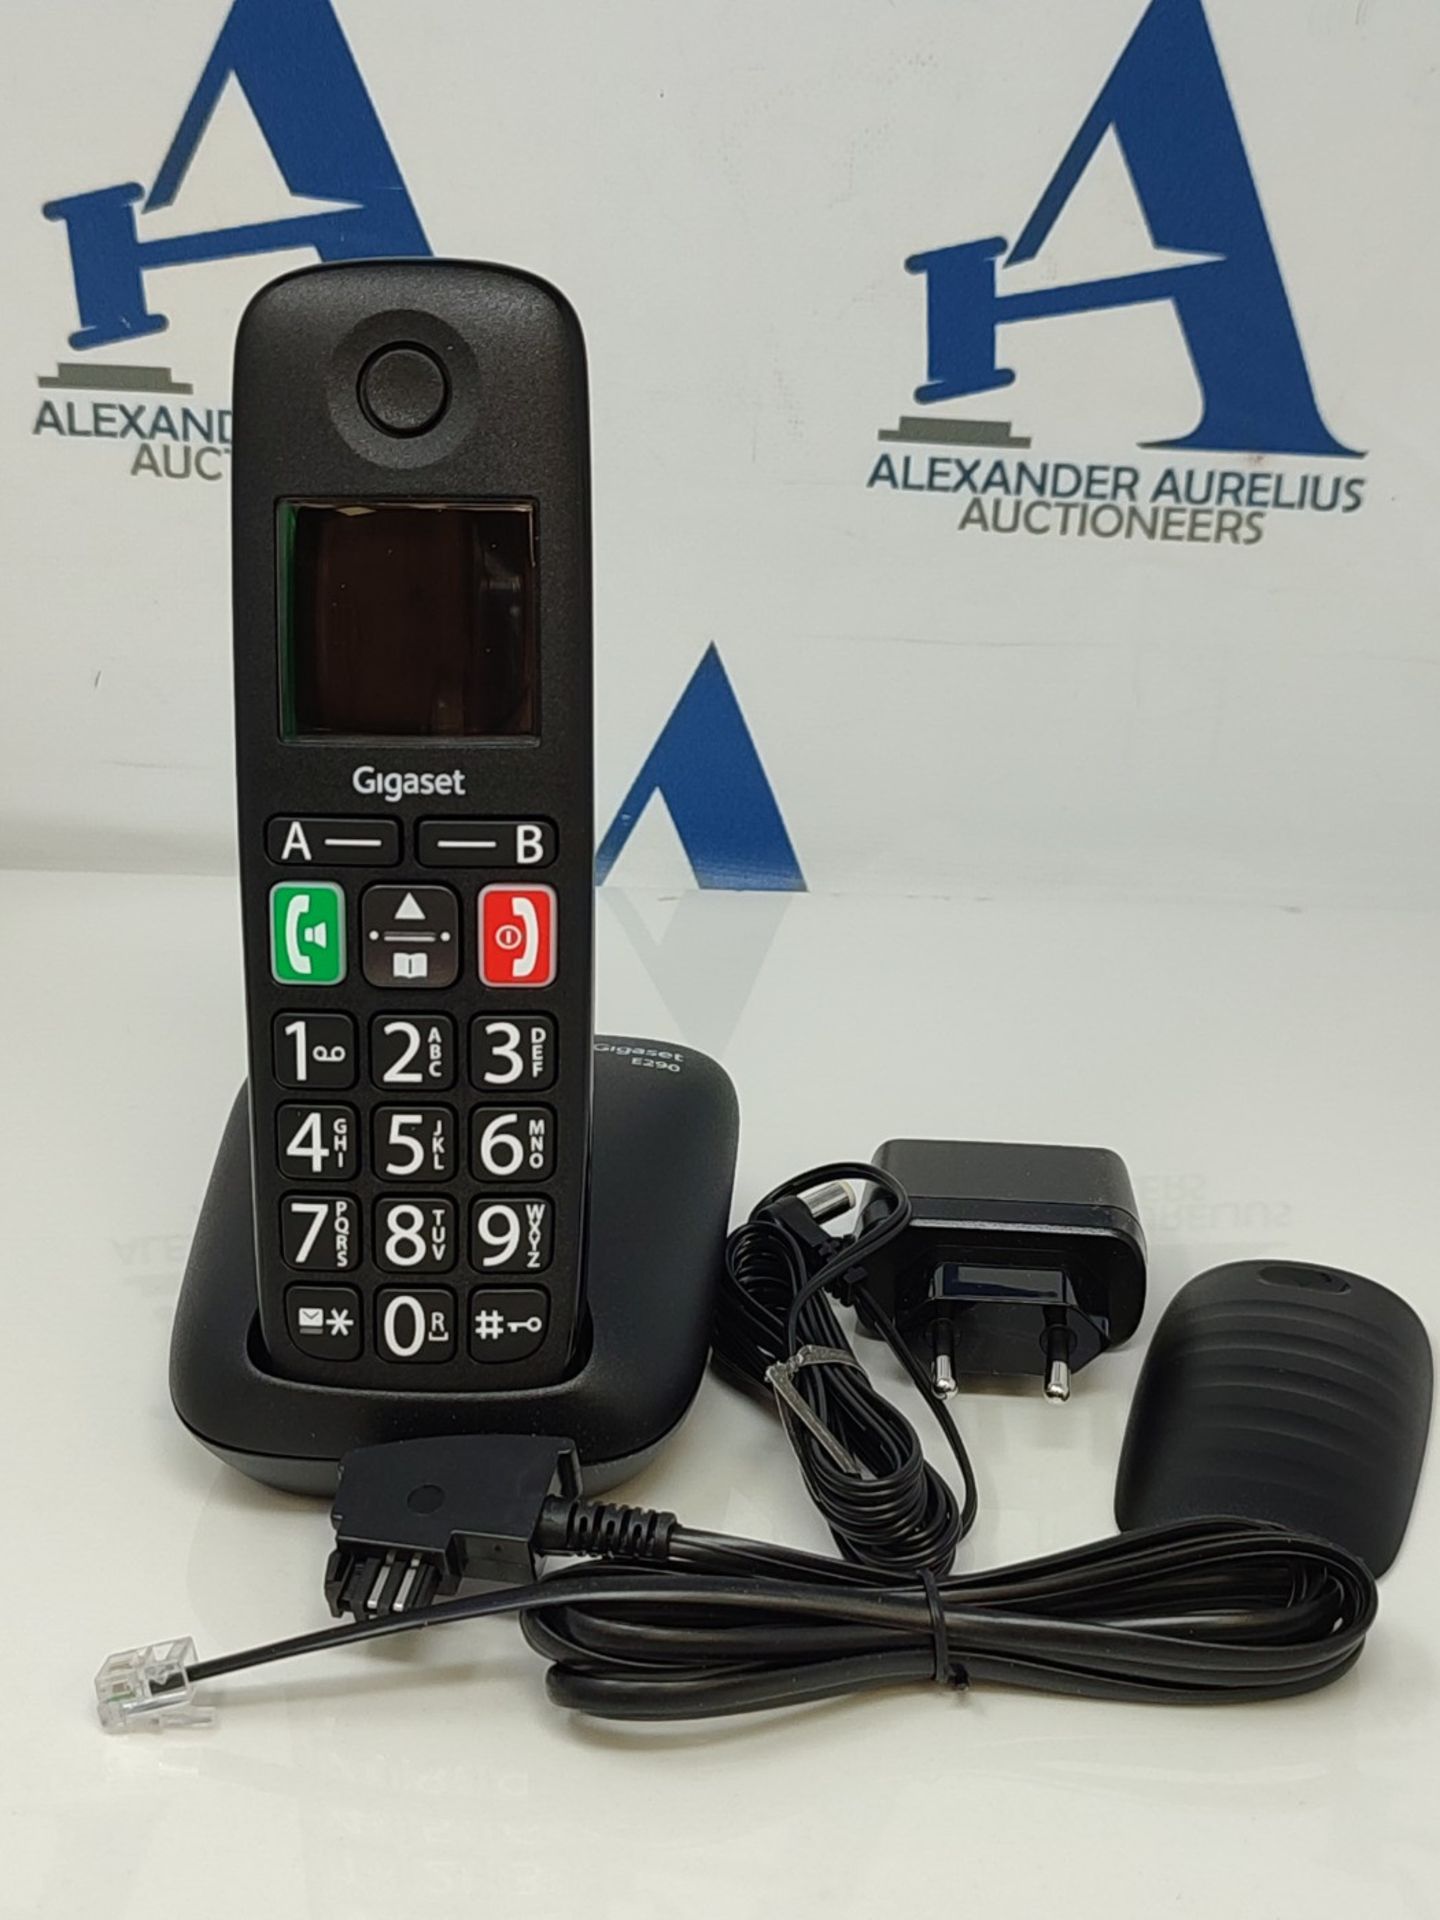 Gigaset E290 - Cordless senior phone without answering machine with large buttons - la - Image 2 of 2